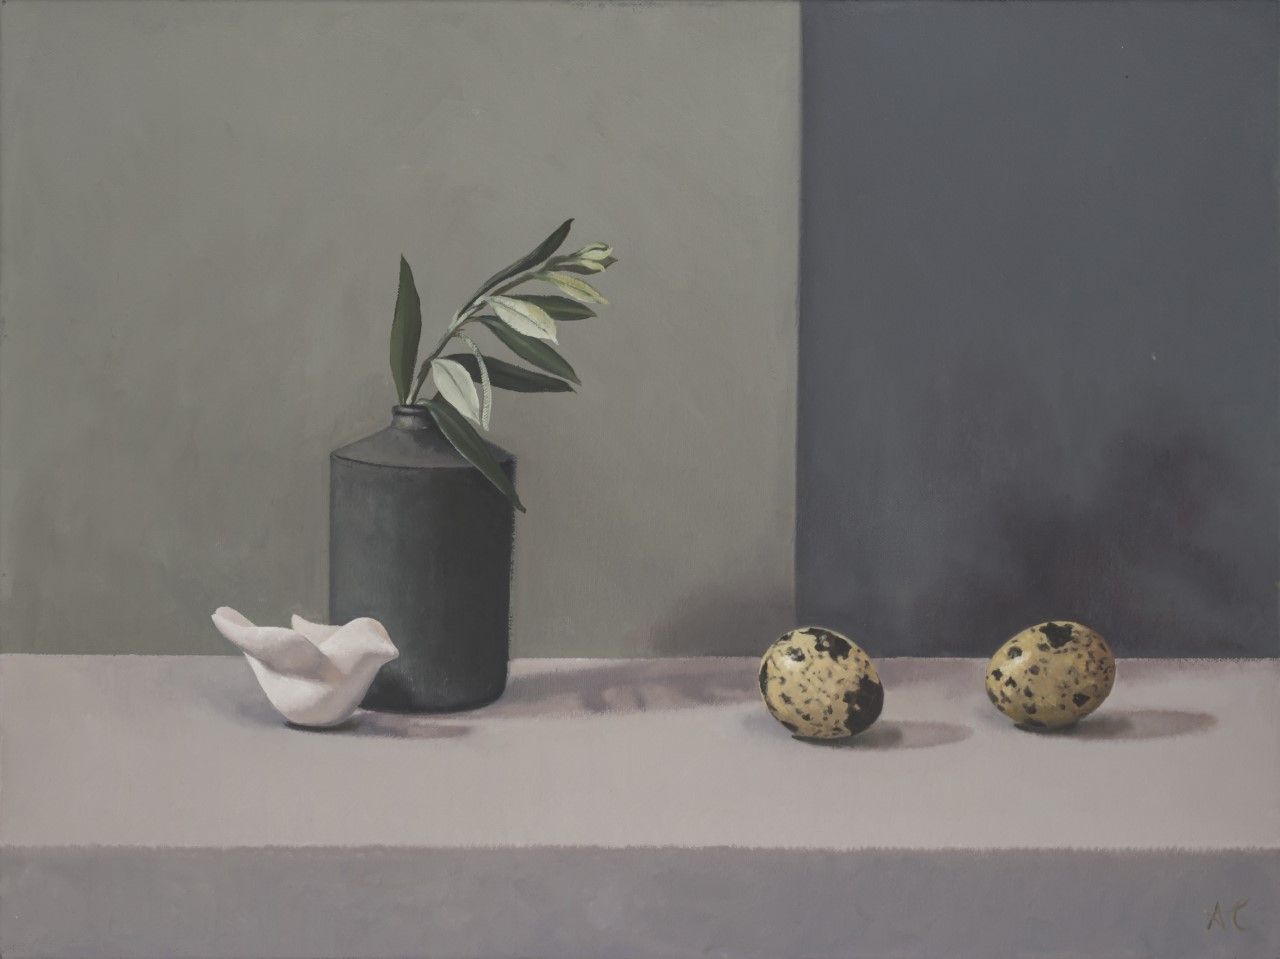 Dove, Olive Branch & Eggs by Amy Chudley